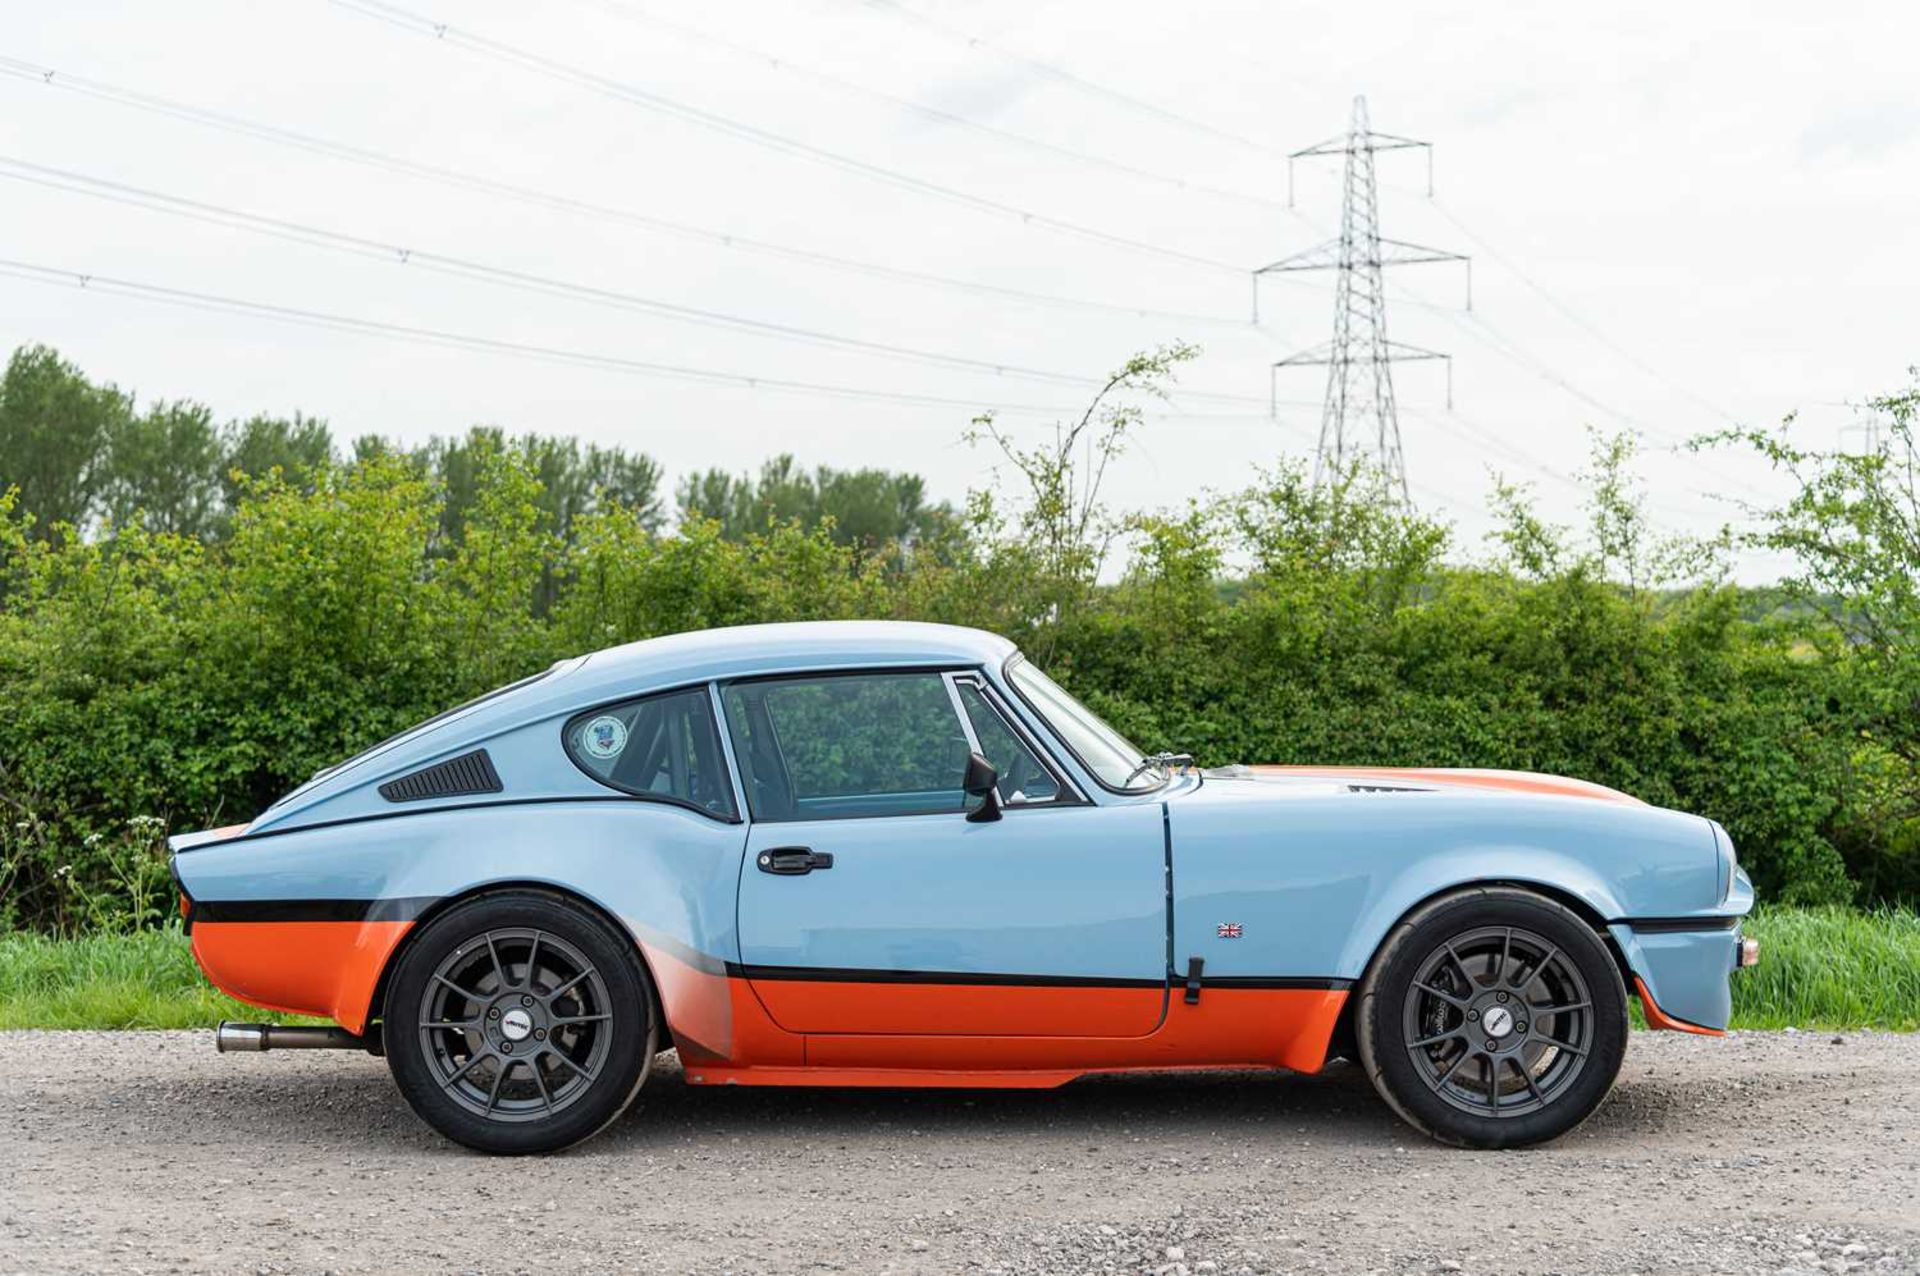 1973 Triumph GT6  ***NO RESERVE*** Presented in Gulf Racing-inspired paintwork, road-going track wea - Bild 9 aus 65